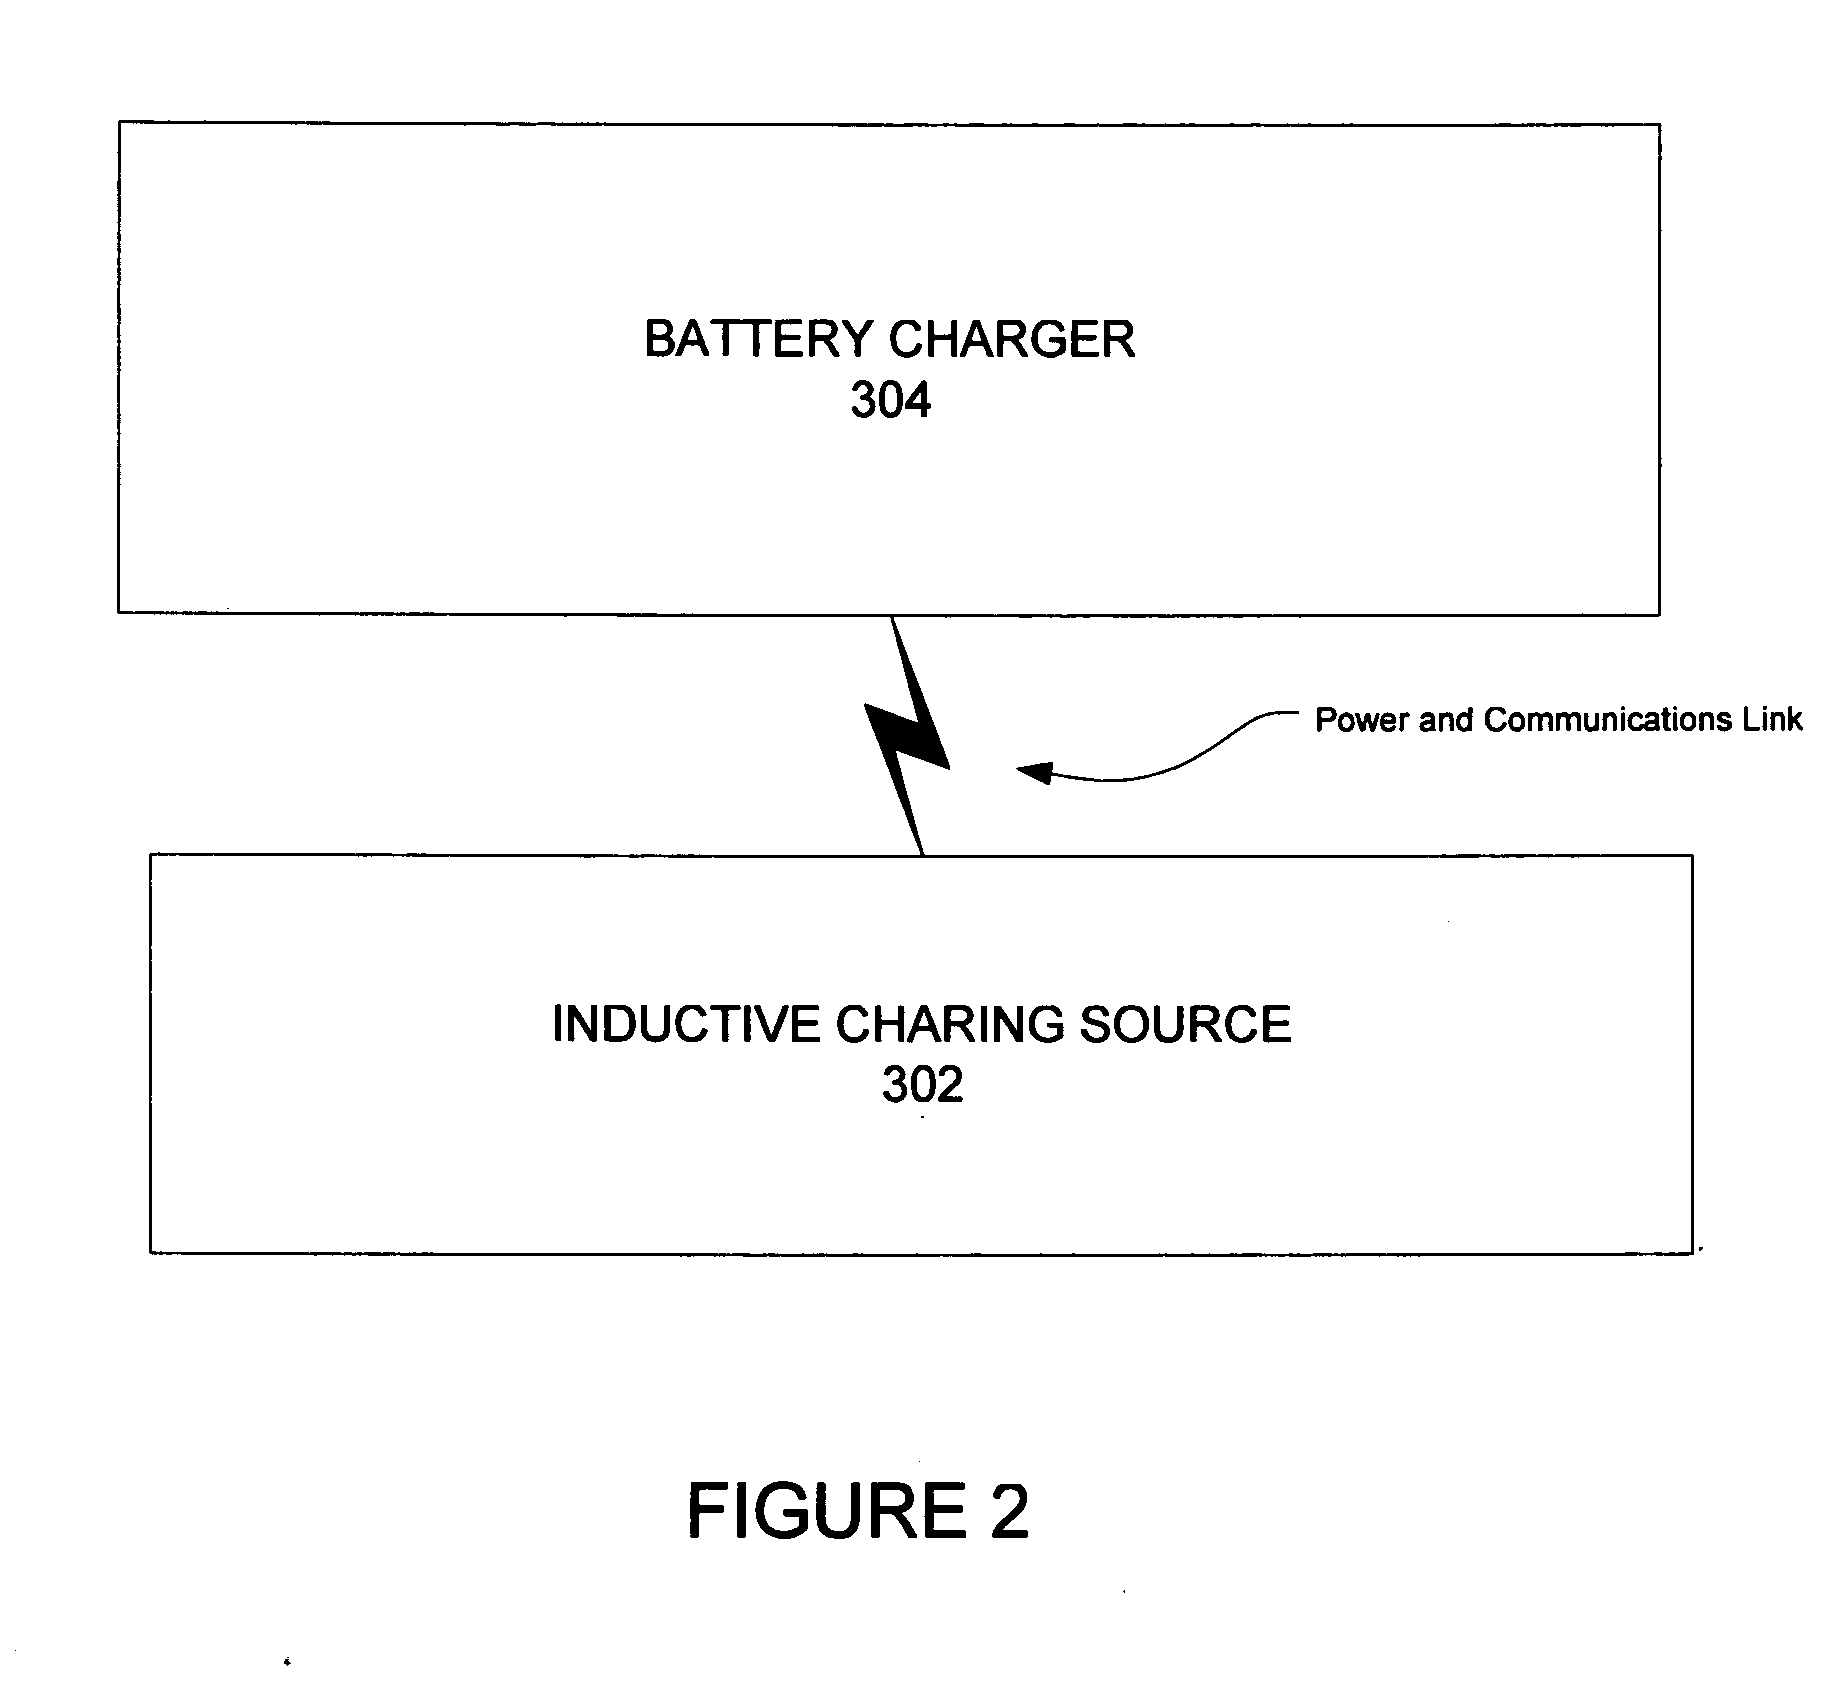 Inductive battery charger